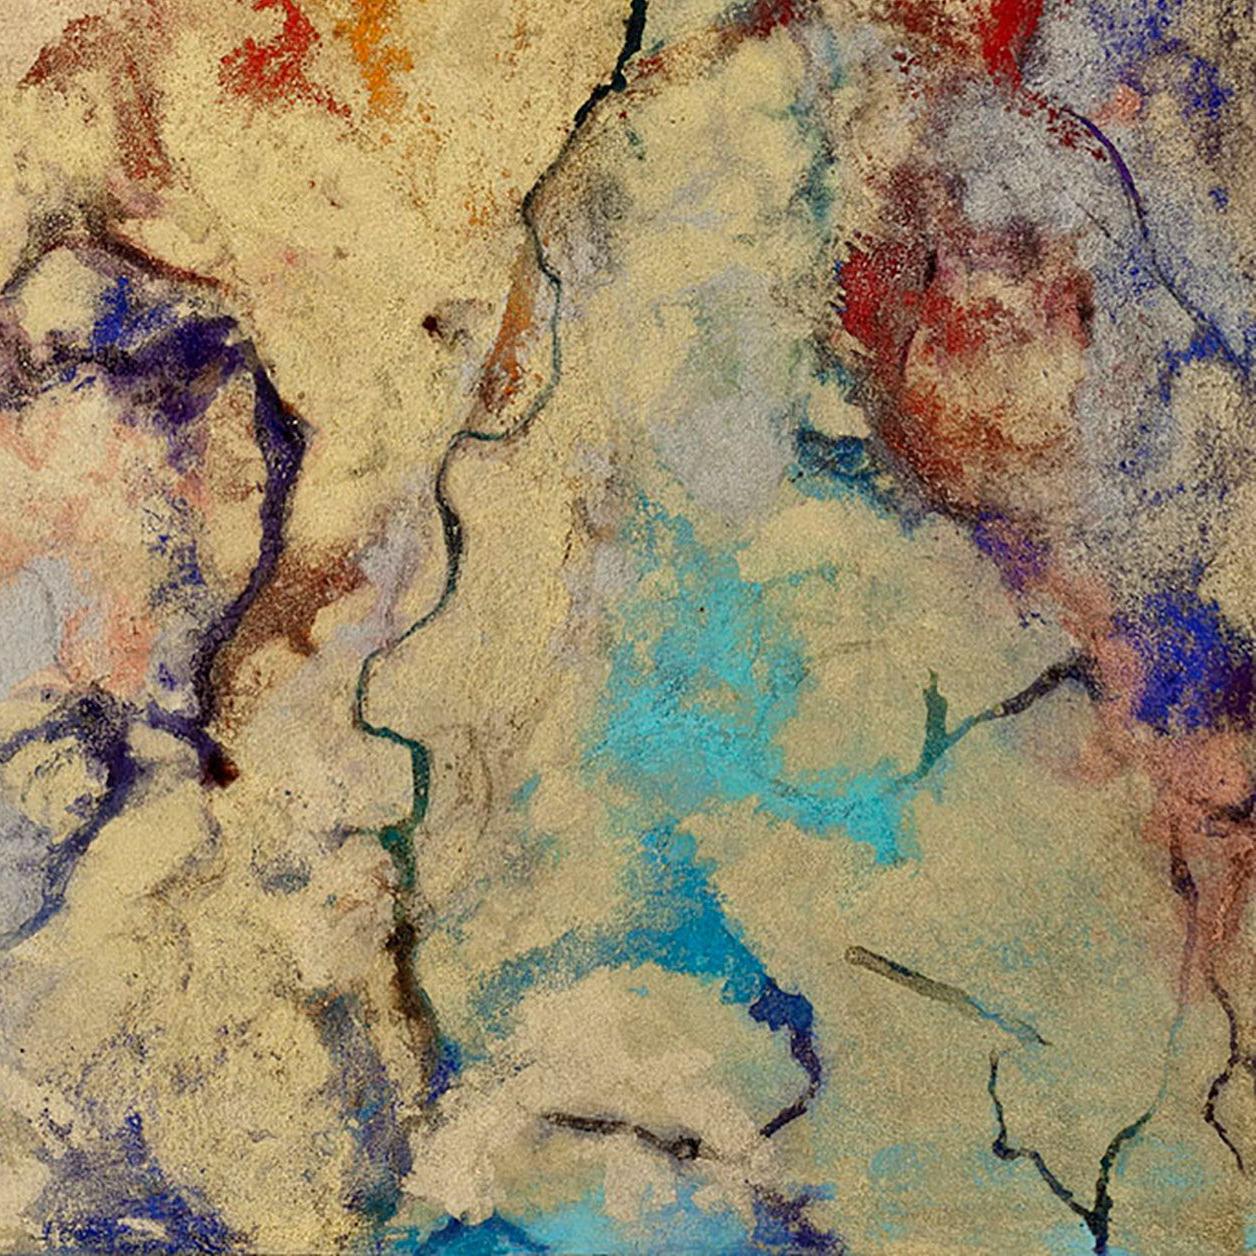 aesturial I, Mixed Media on Paper - Abstract Mixed Media Art by Nini Lion